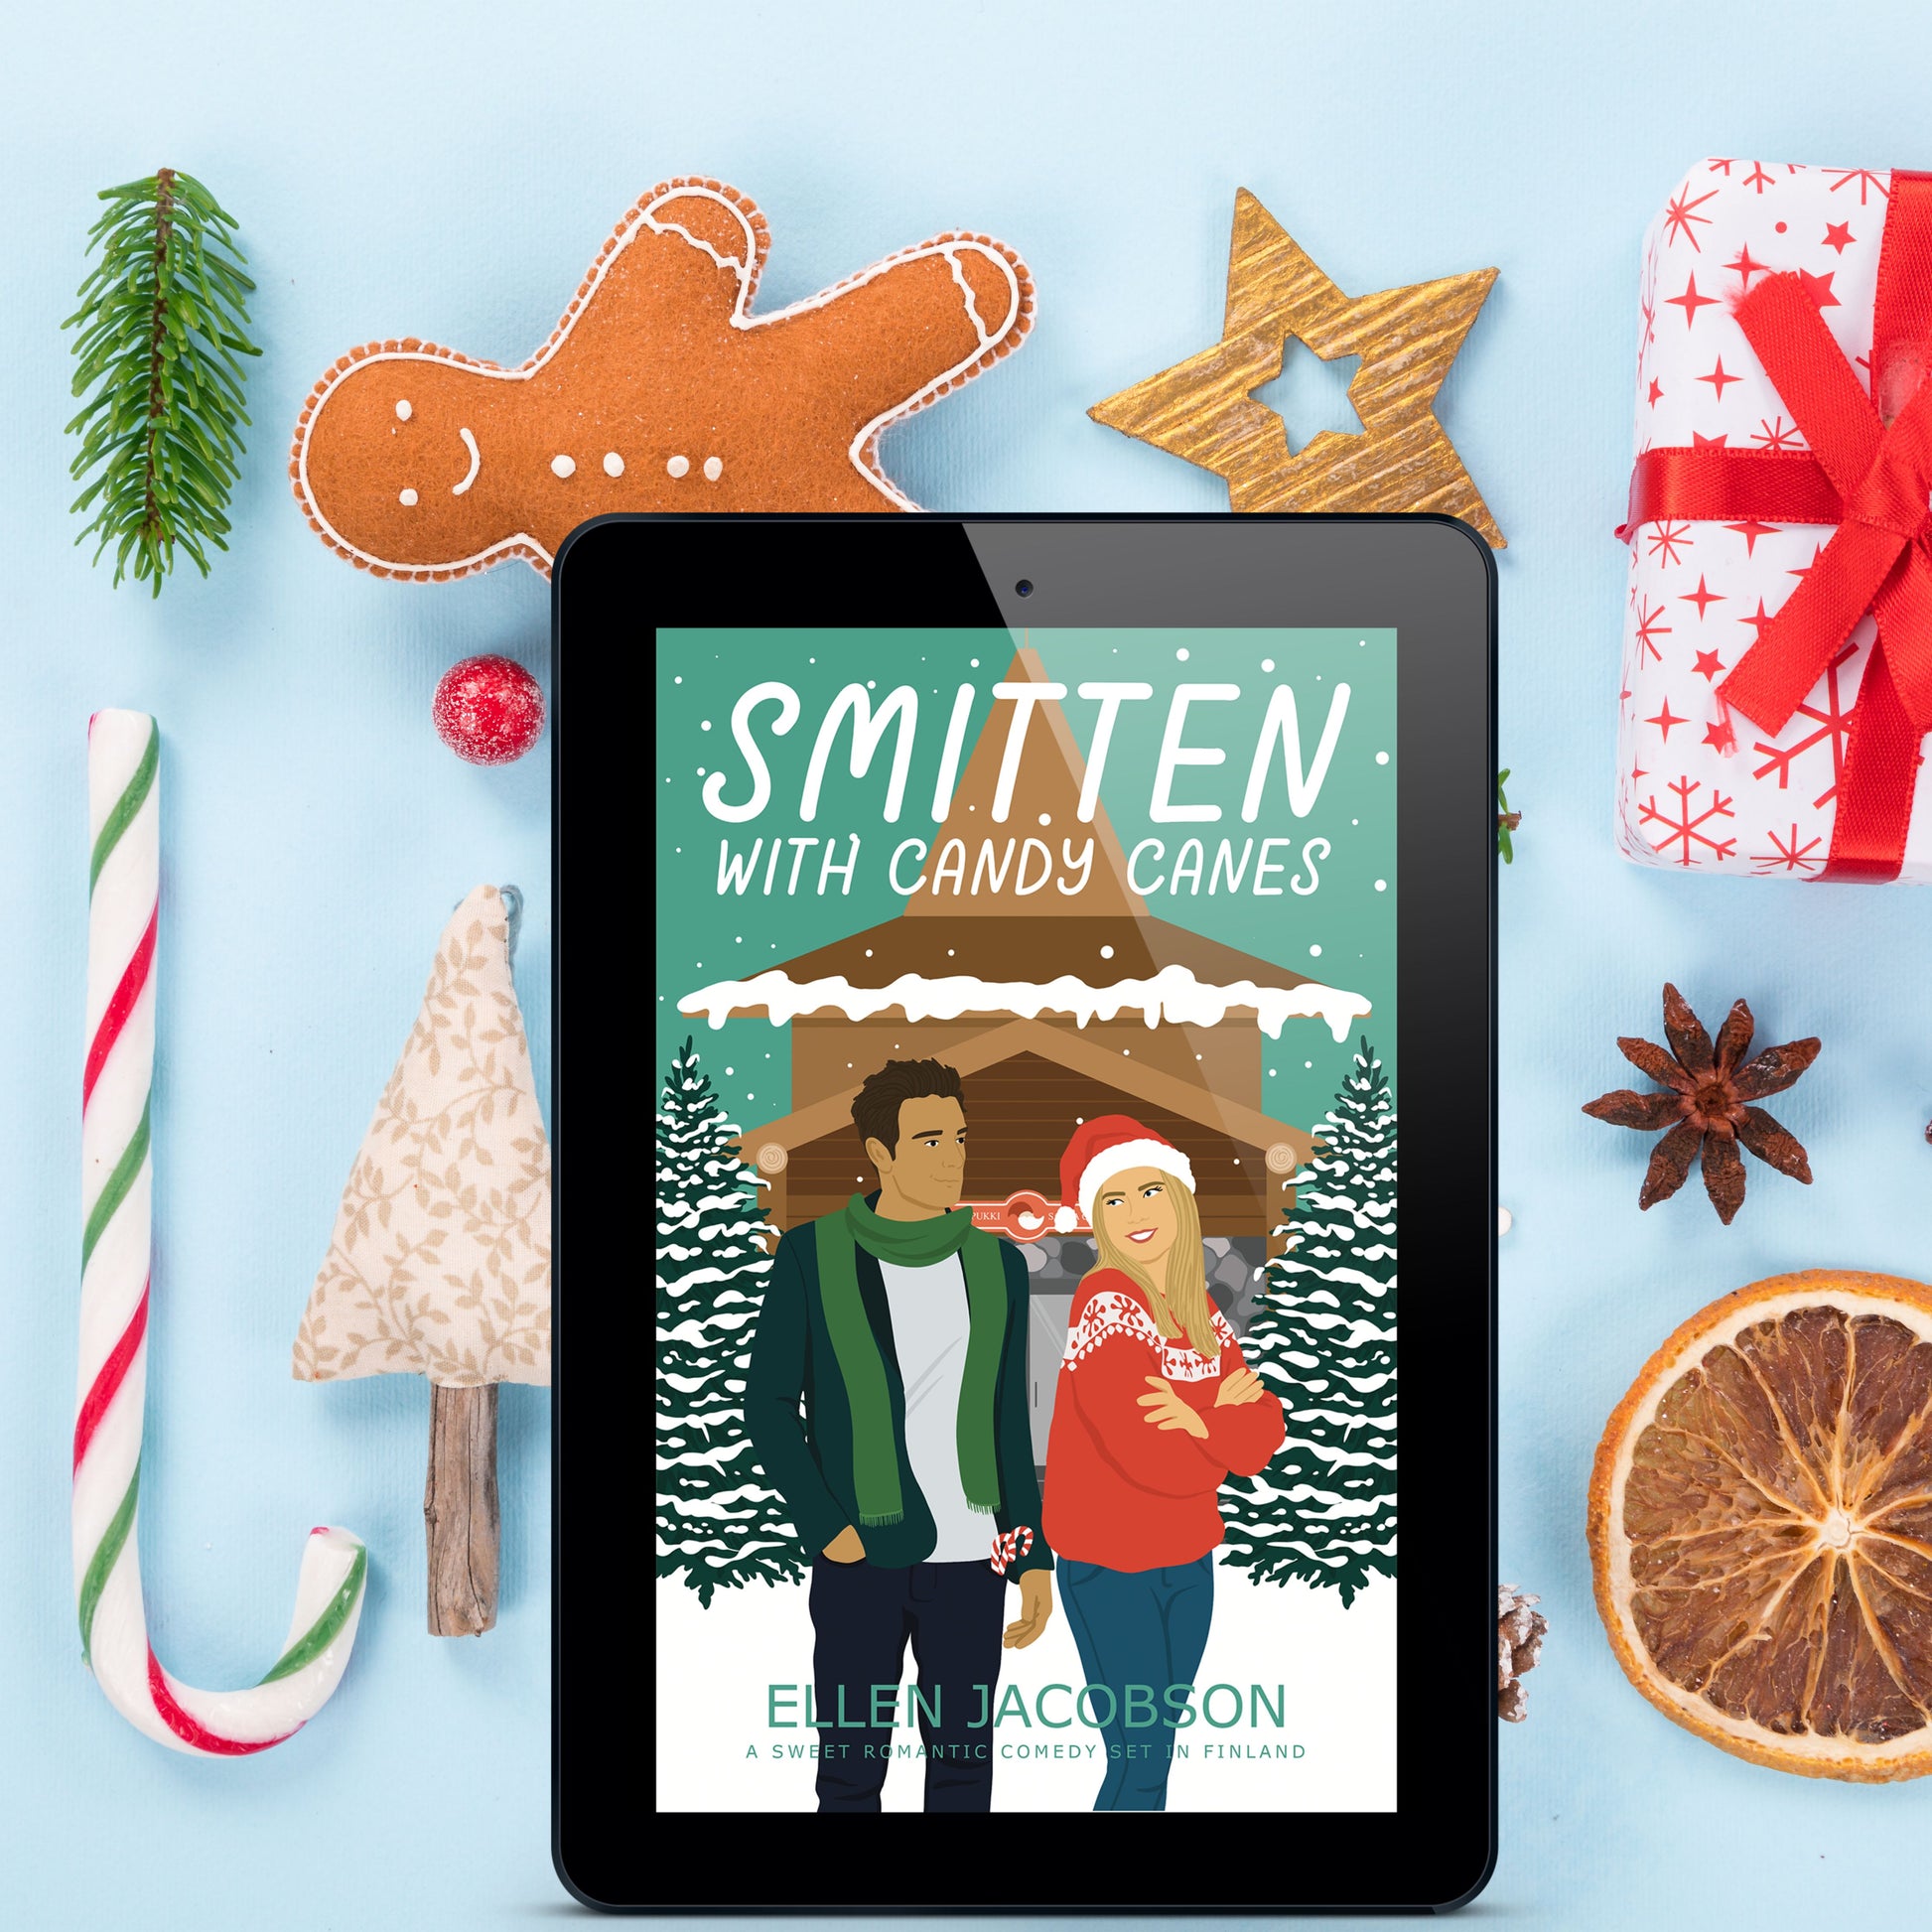 Smitten with Candy Canes ebook cover against Christmas background